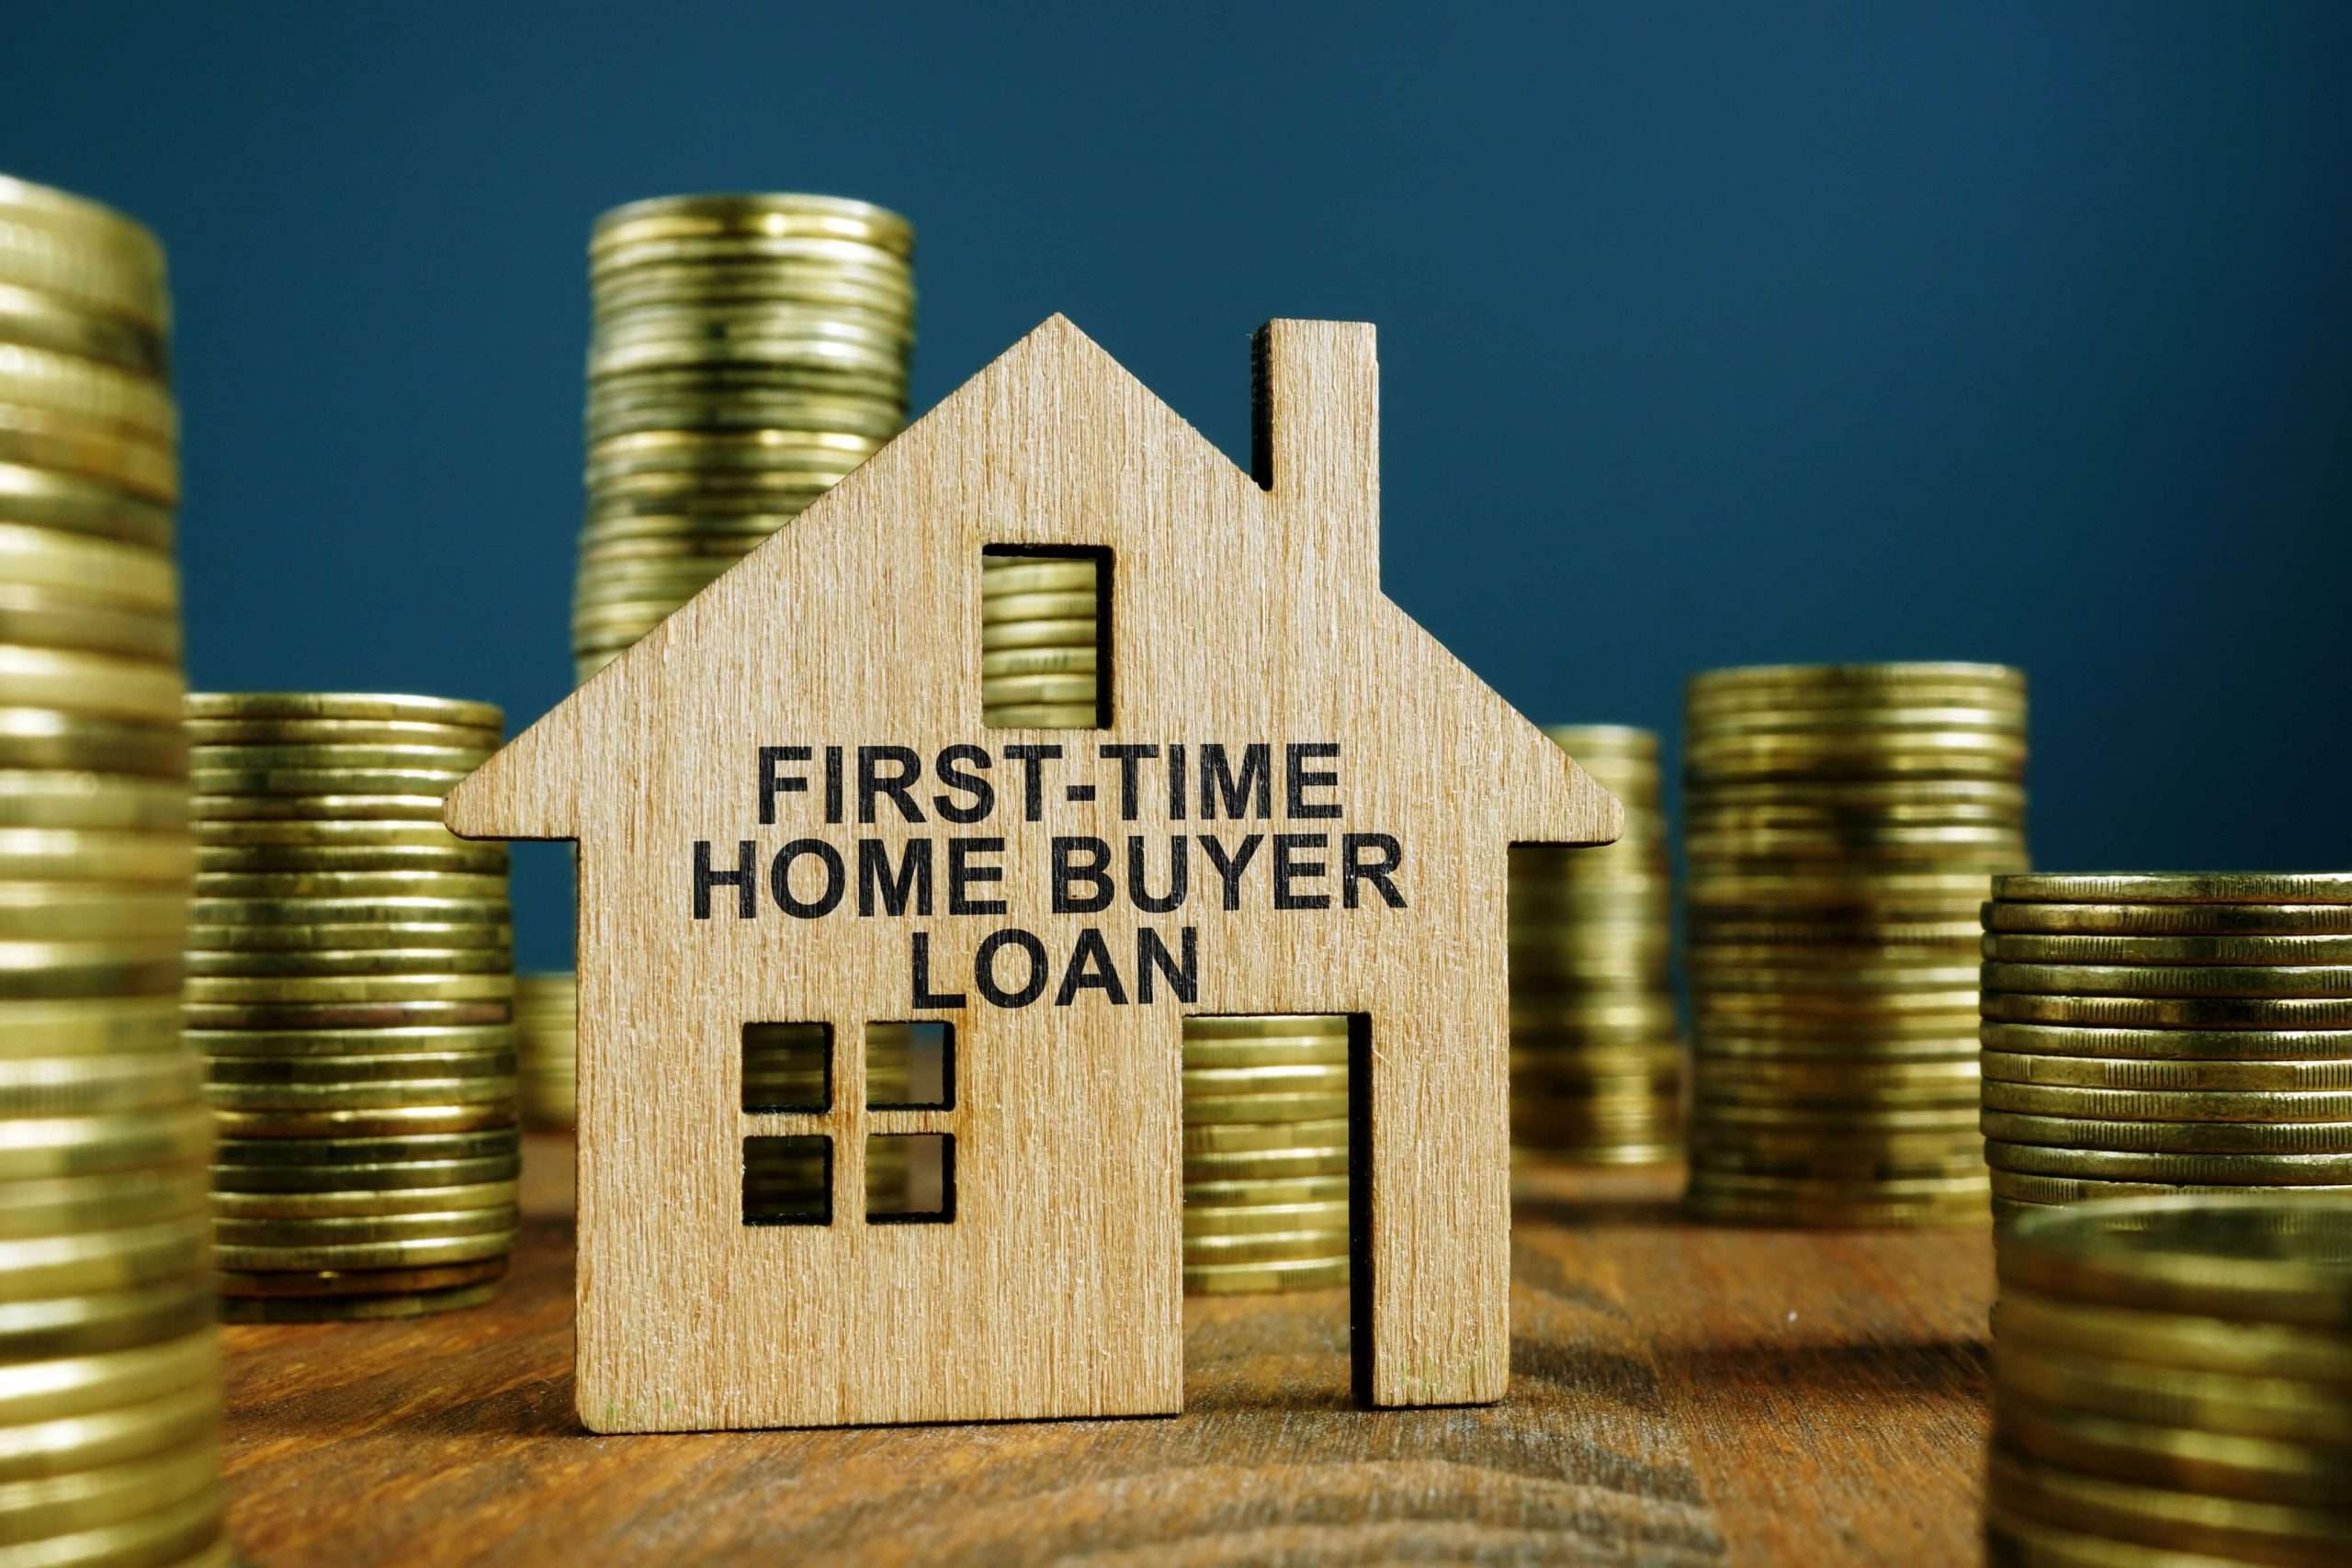 interiorsdesignsny: Cheapest First Time Home Buyer Loan